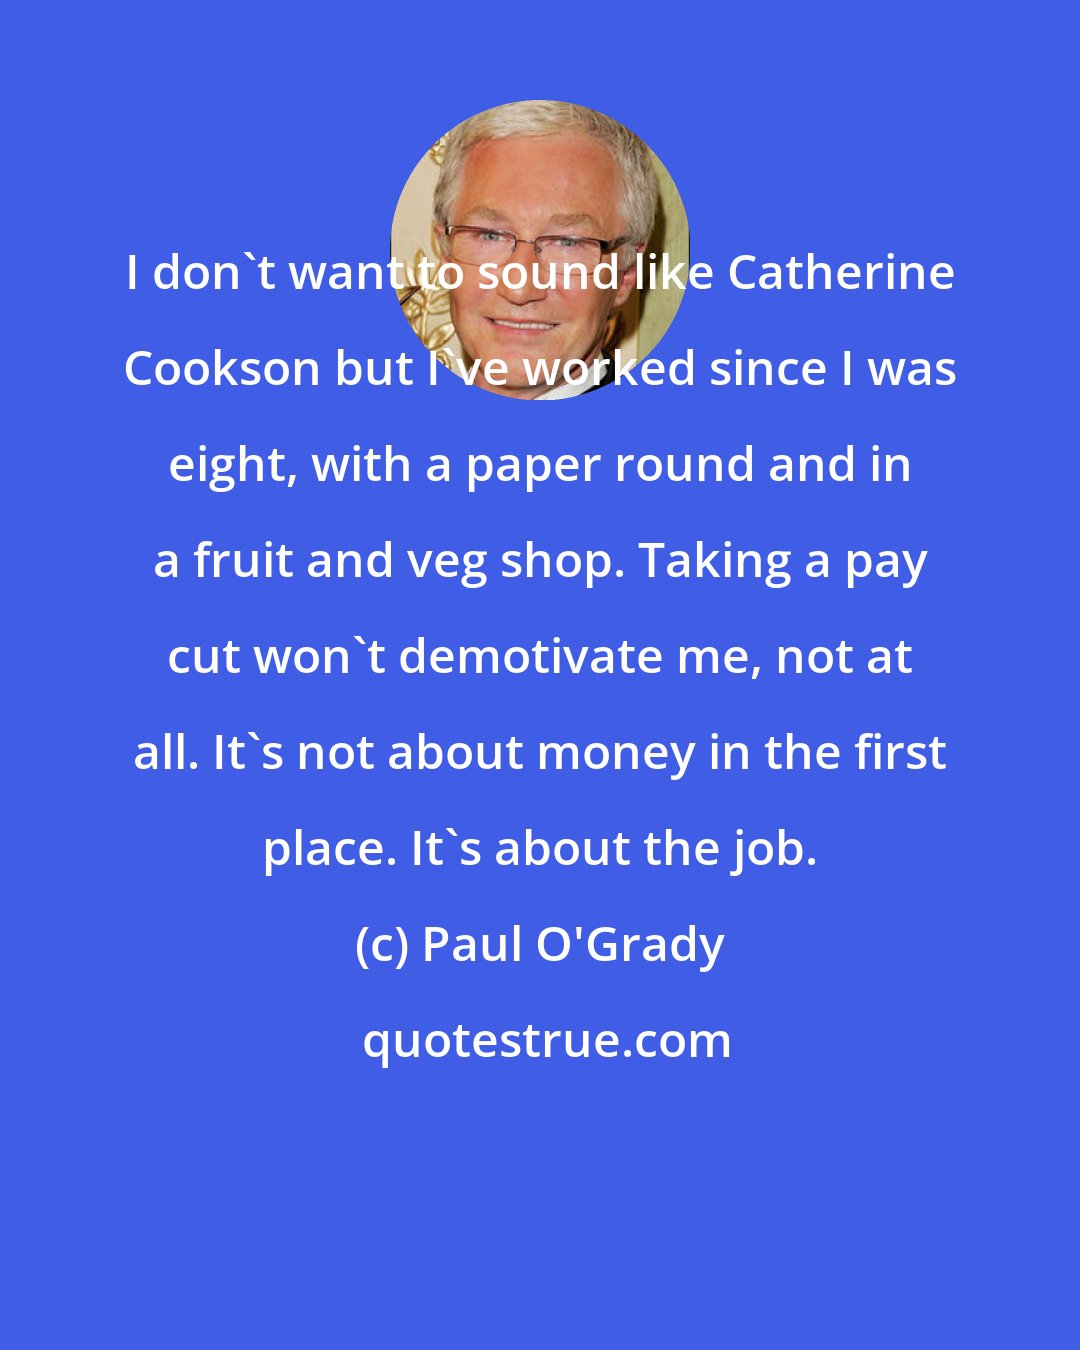 Paul O'Grady: I don't want to sound like Catherine Cookson but I've worked since I was eight, with a paper round and in a fruit and veg shop. Taking a pay cut won't demotivate me, not at all. It's not about money in the first place. It's about the job.